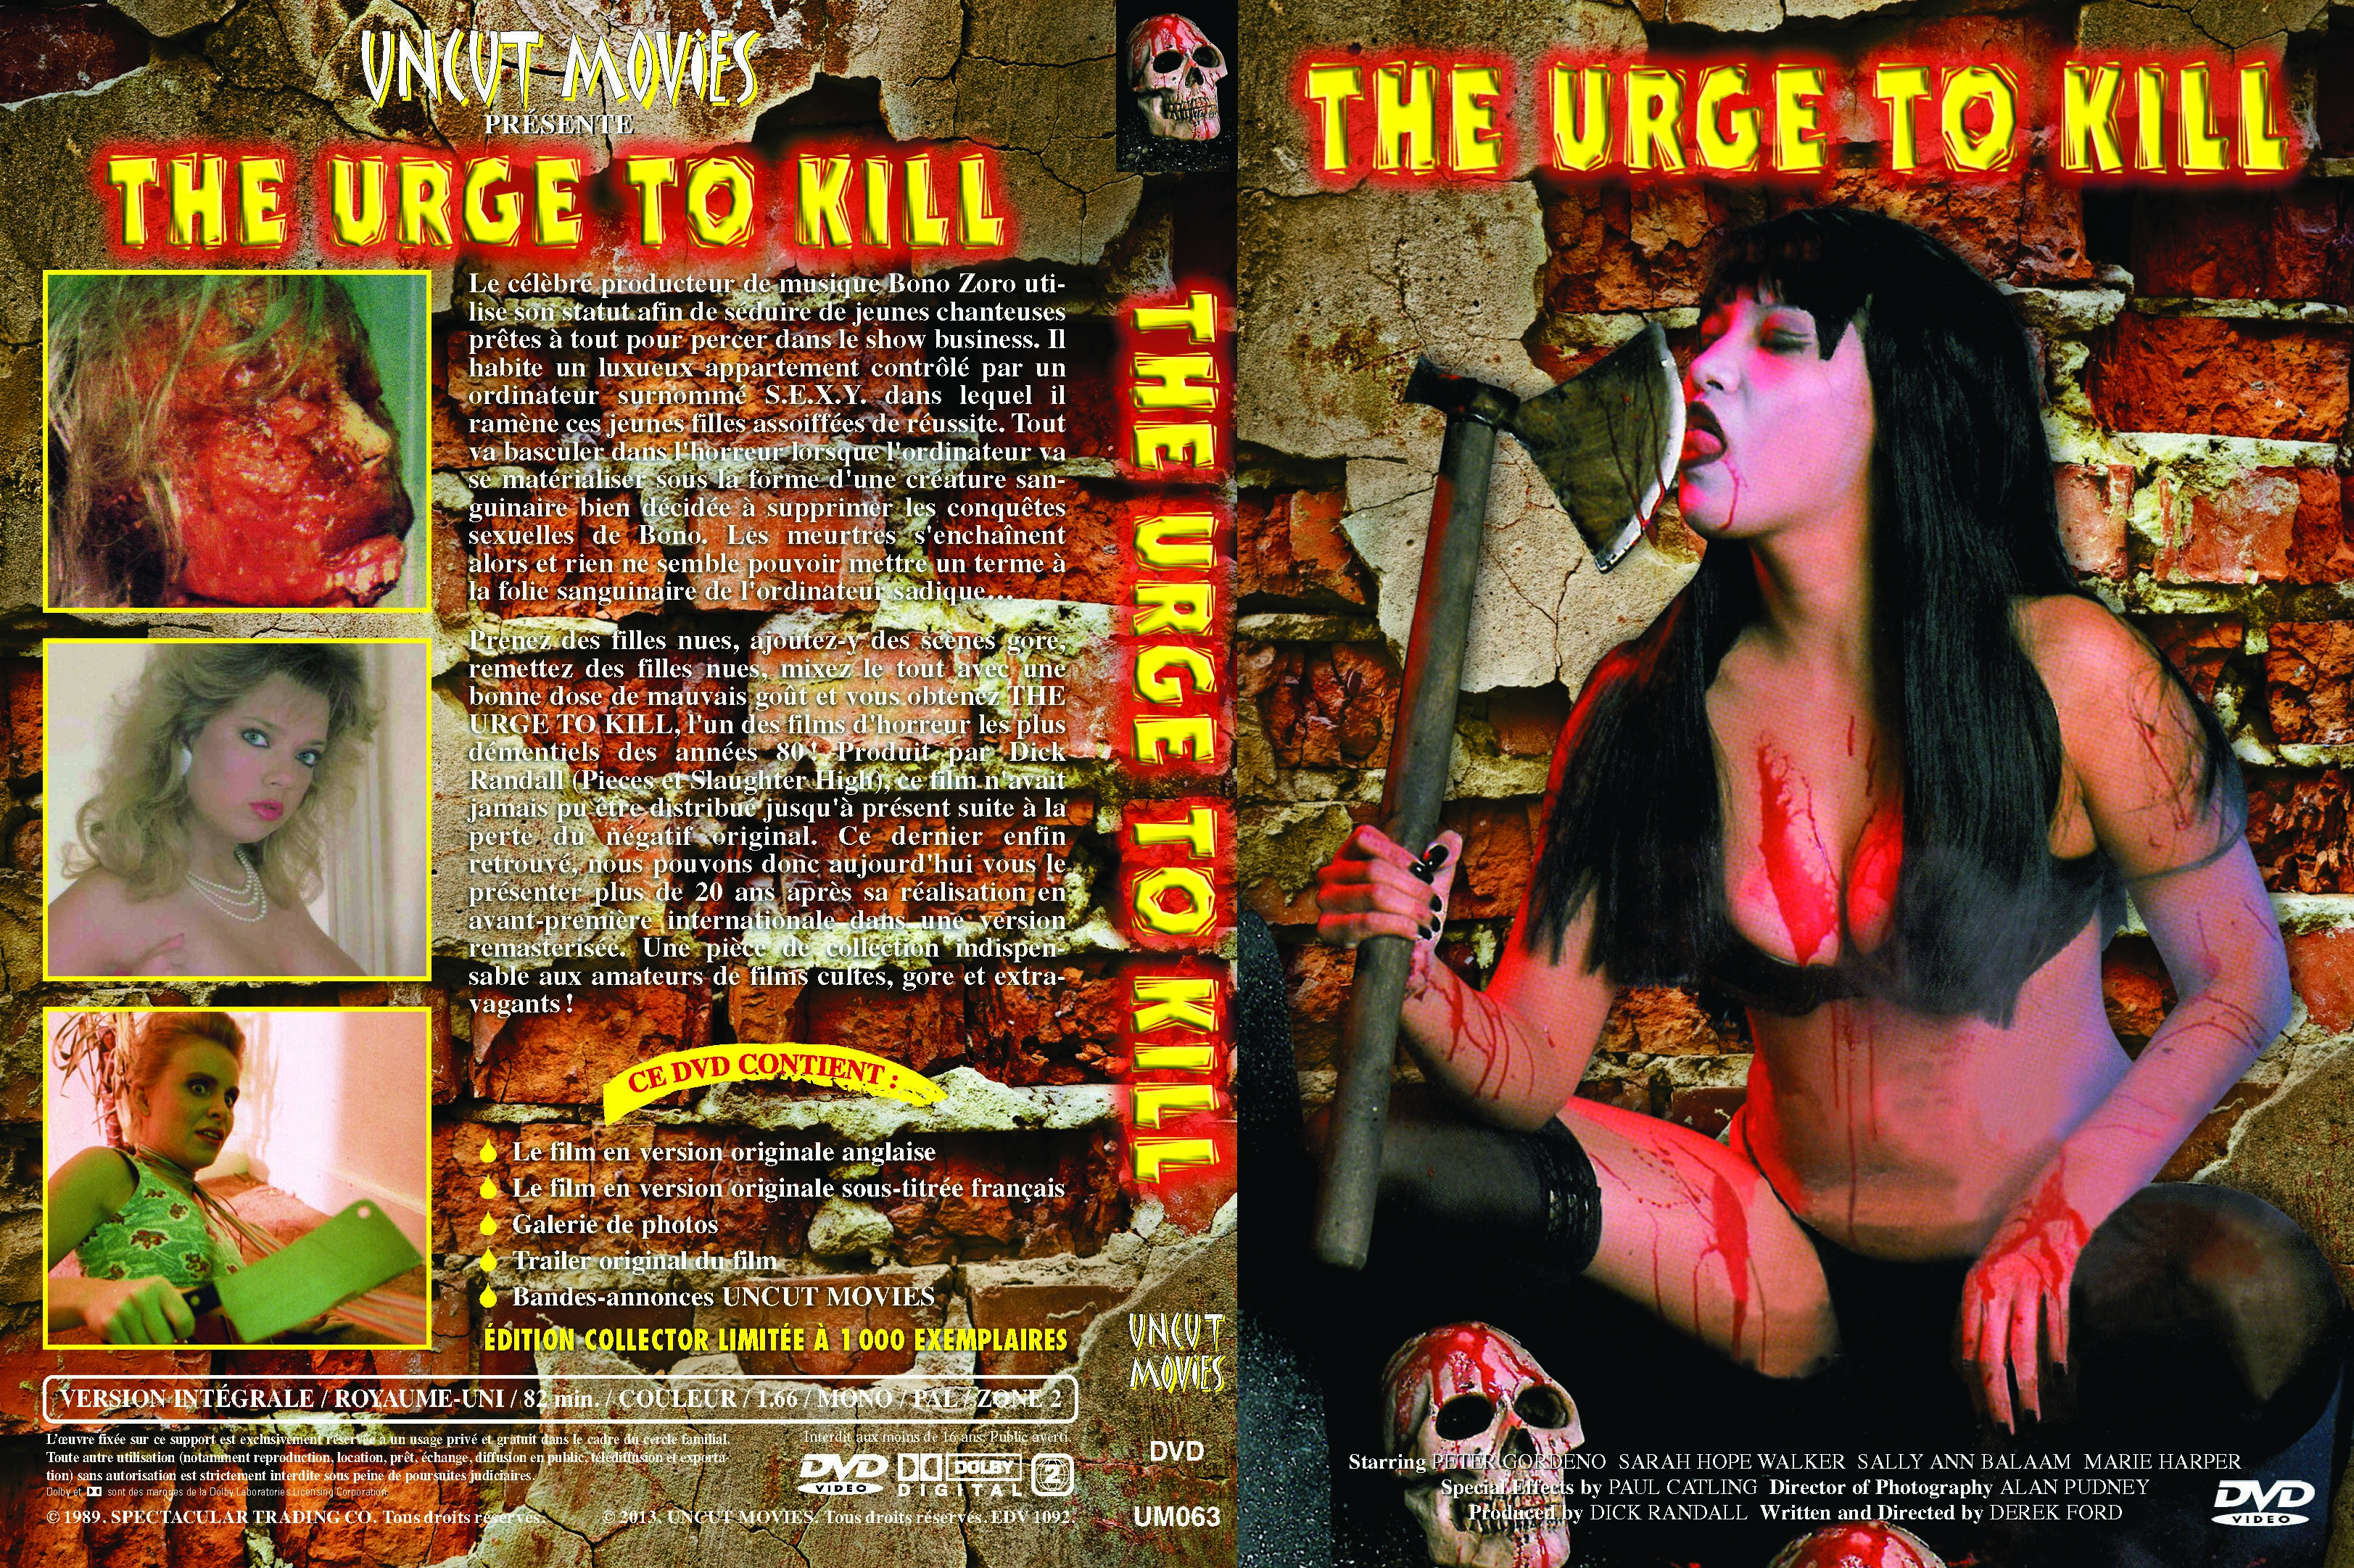 Jaquette DVD The Urge to Kill